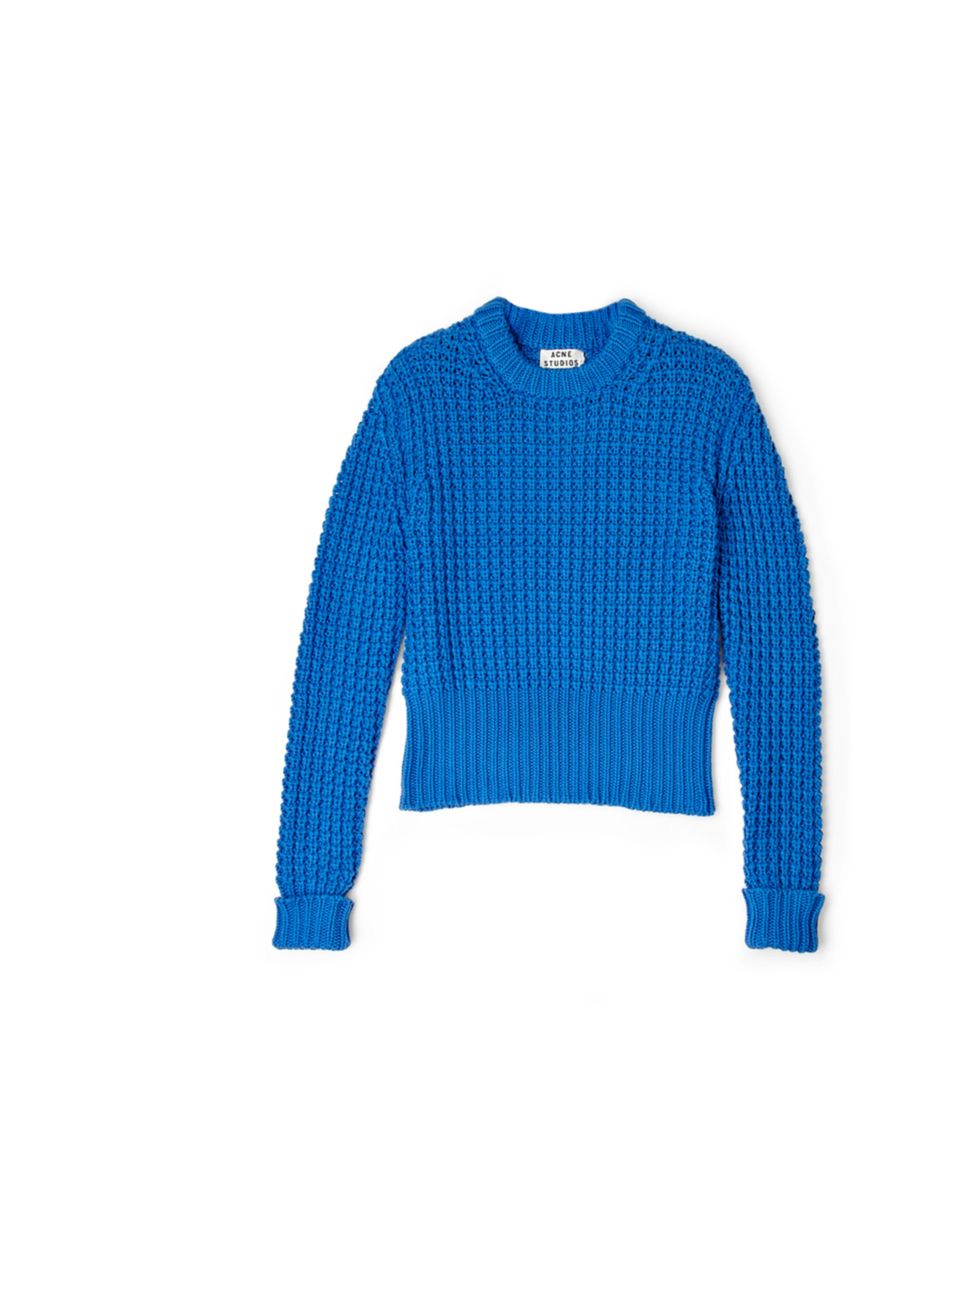 <p>Revive your knitweasr collection with Acne's stand-out chunky knit... Acne blue waffle knit jumper, £200, at My-Wardrobe.com</p><p><a href="http://shopping.elleuk.com/browse?fts=acne+jumper+my-wardrobe">BUY NOW</a></p>